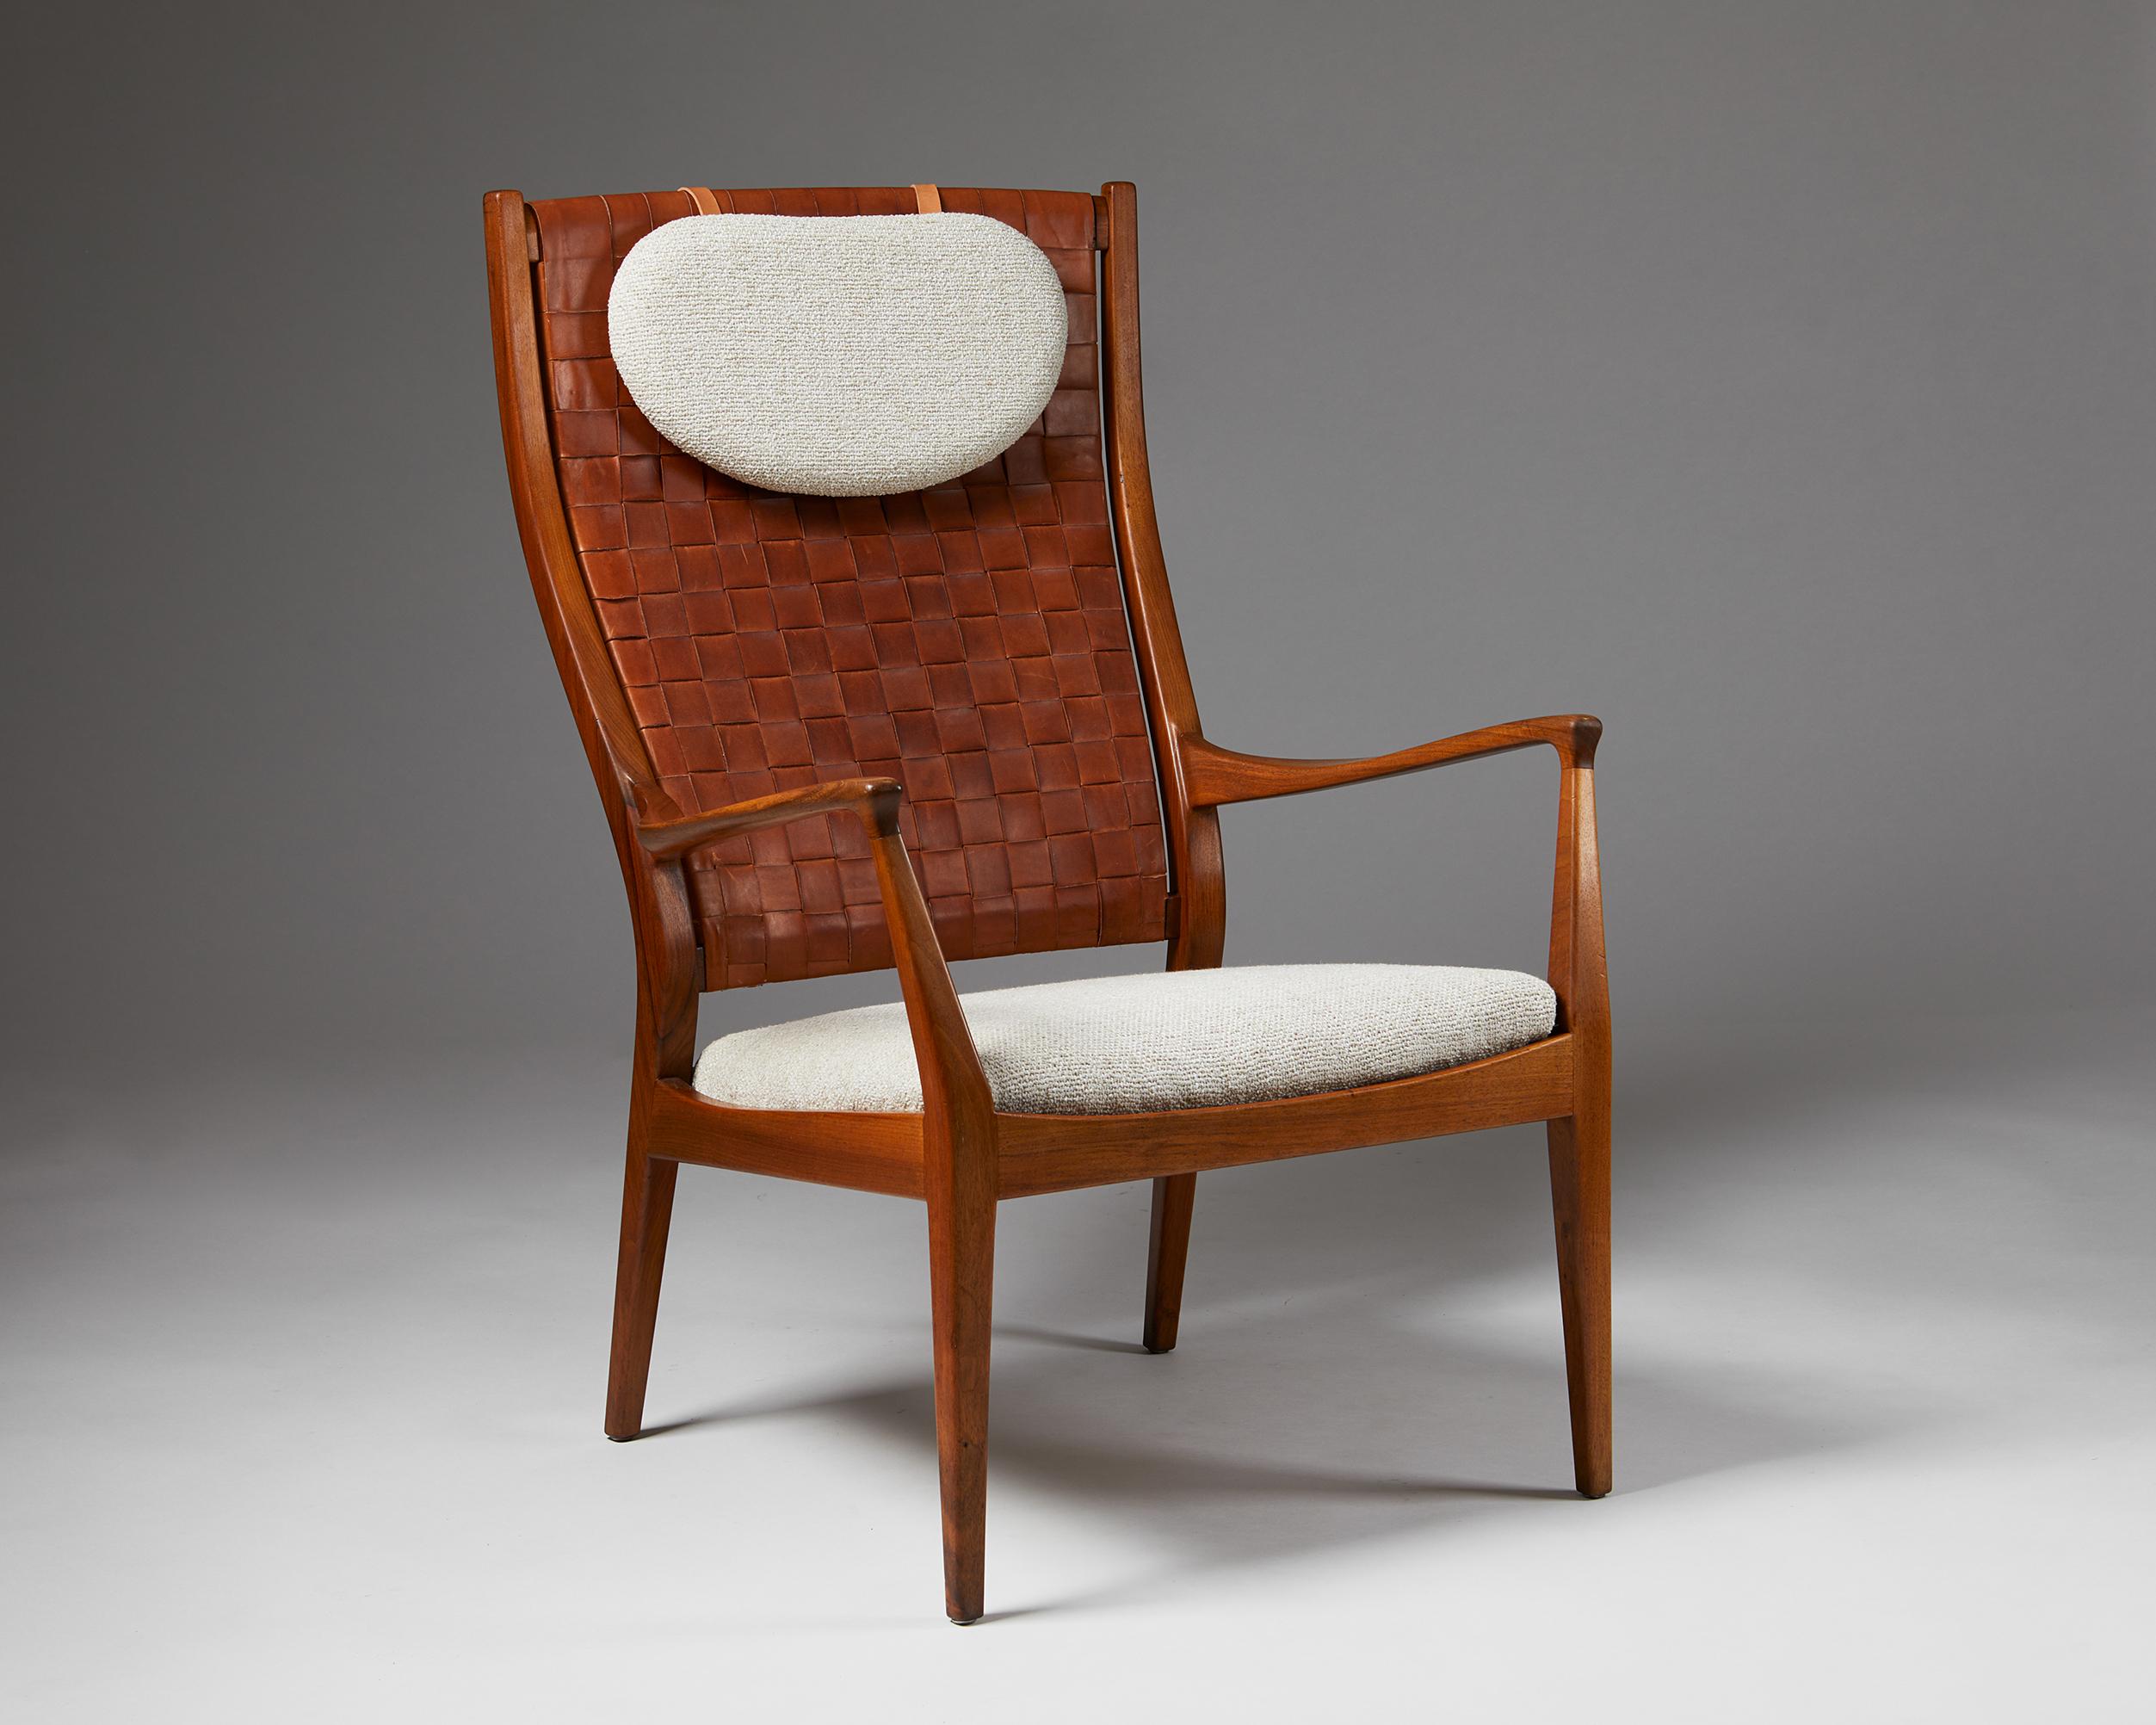 Highback easy chair designed by Erik Kolling Andersen for Peder Pedersen,
Denmark. 1950s.
Nutwood, leather and upholstery in Boucle.

Model presented at The Copenhagen Cabinetmakers' Guild Exhibition at Designmuseum Danmark, 1950. Literature: